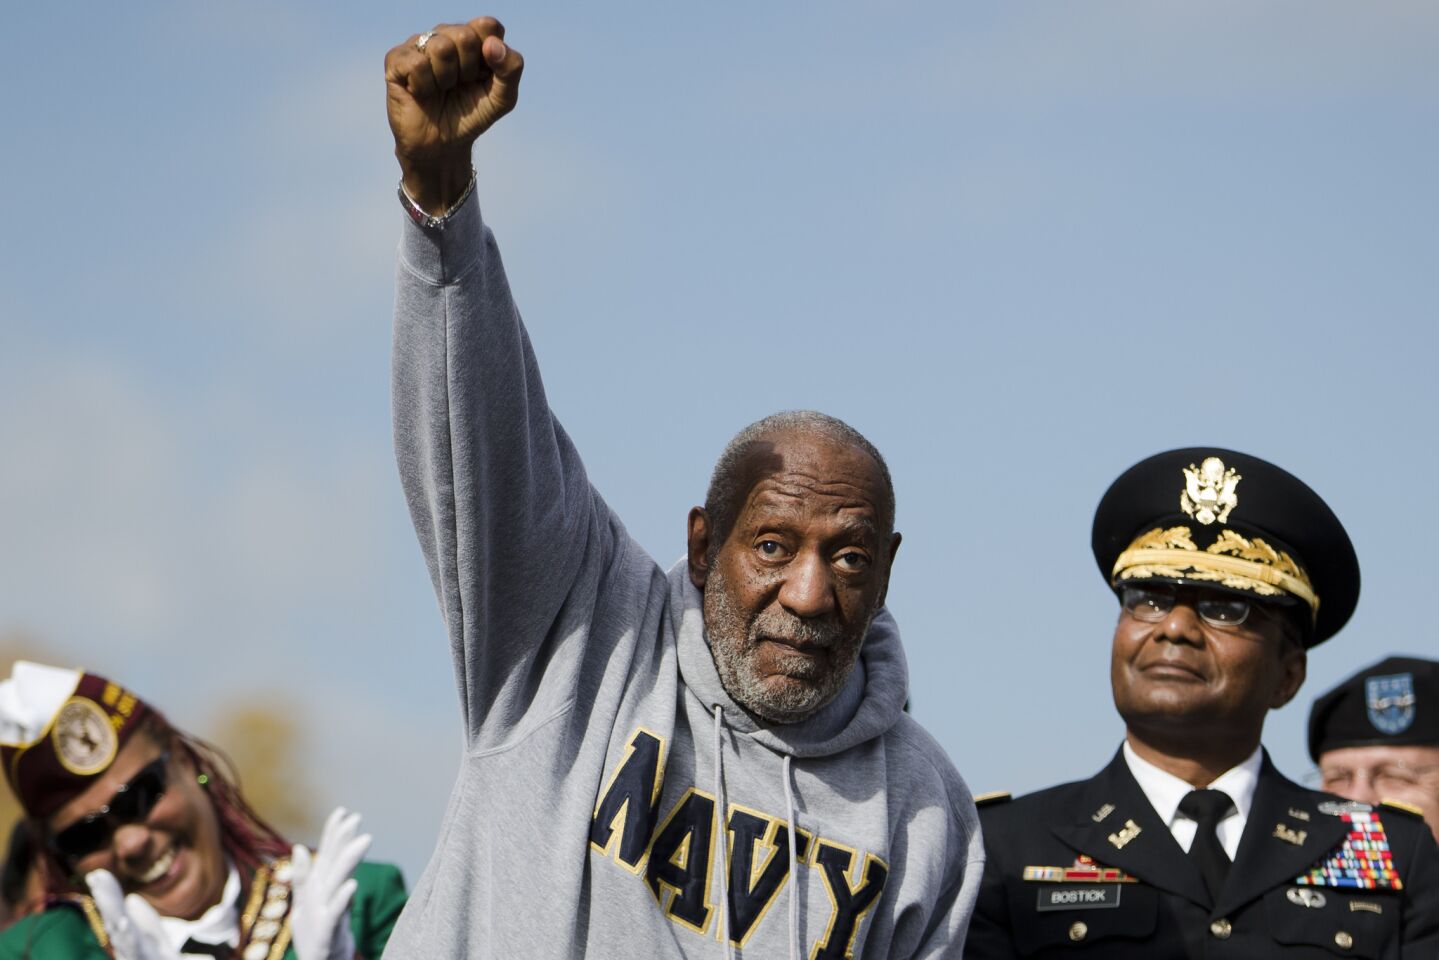 Cosby was born on July 12, 1937 and raised in Philadelphia. After being a sports star in high school, he joined the Navy and has been a vocal supporter ever since. Here, he's shown at a Veterans Day ceremony in 2014.